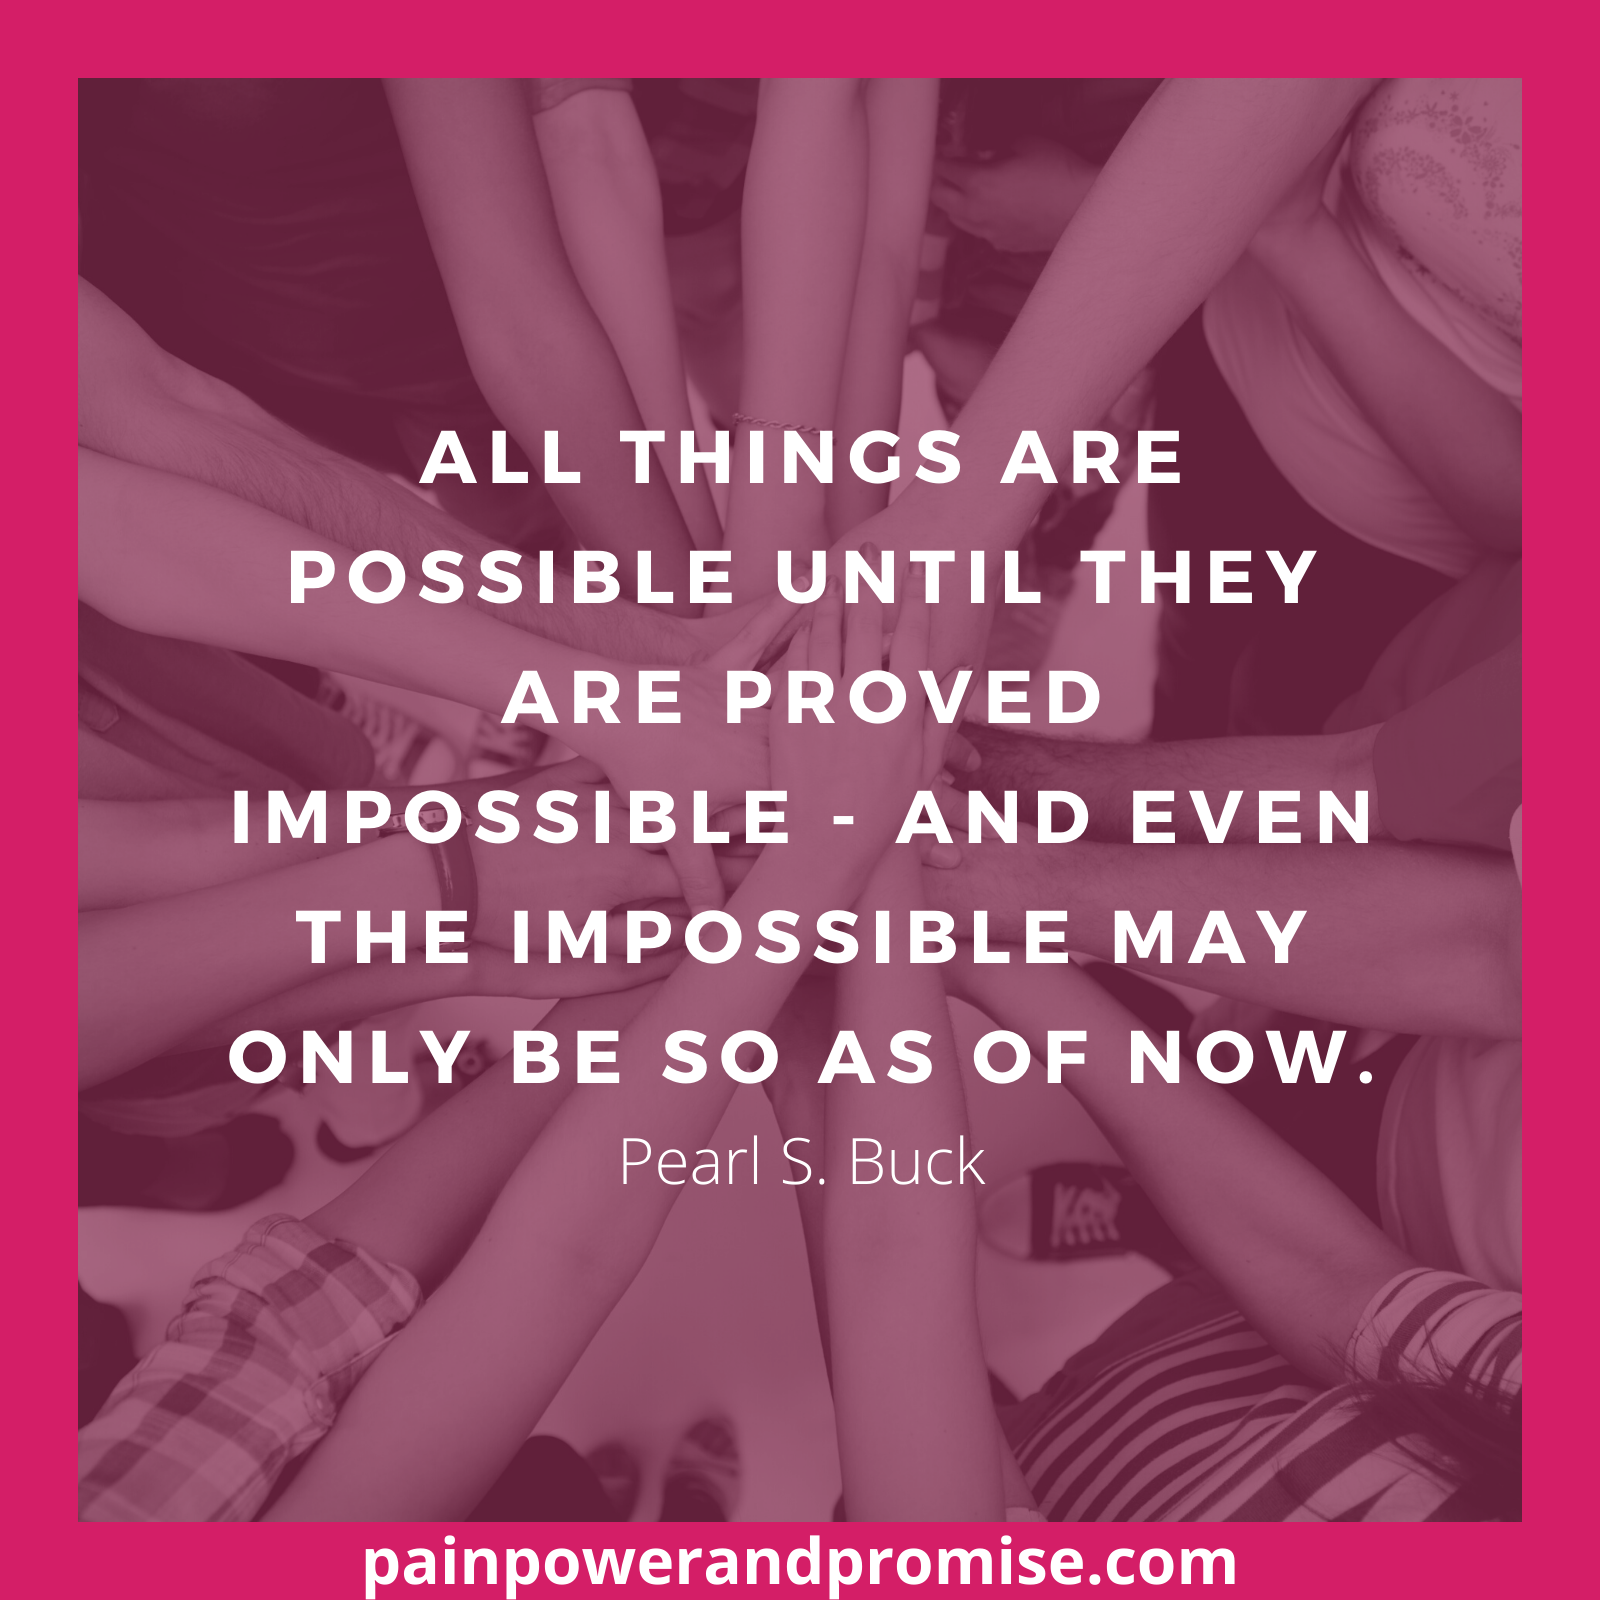 All things are possible until they are proved impossible - and even the impossible may only be so as of now.